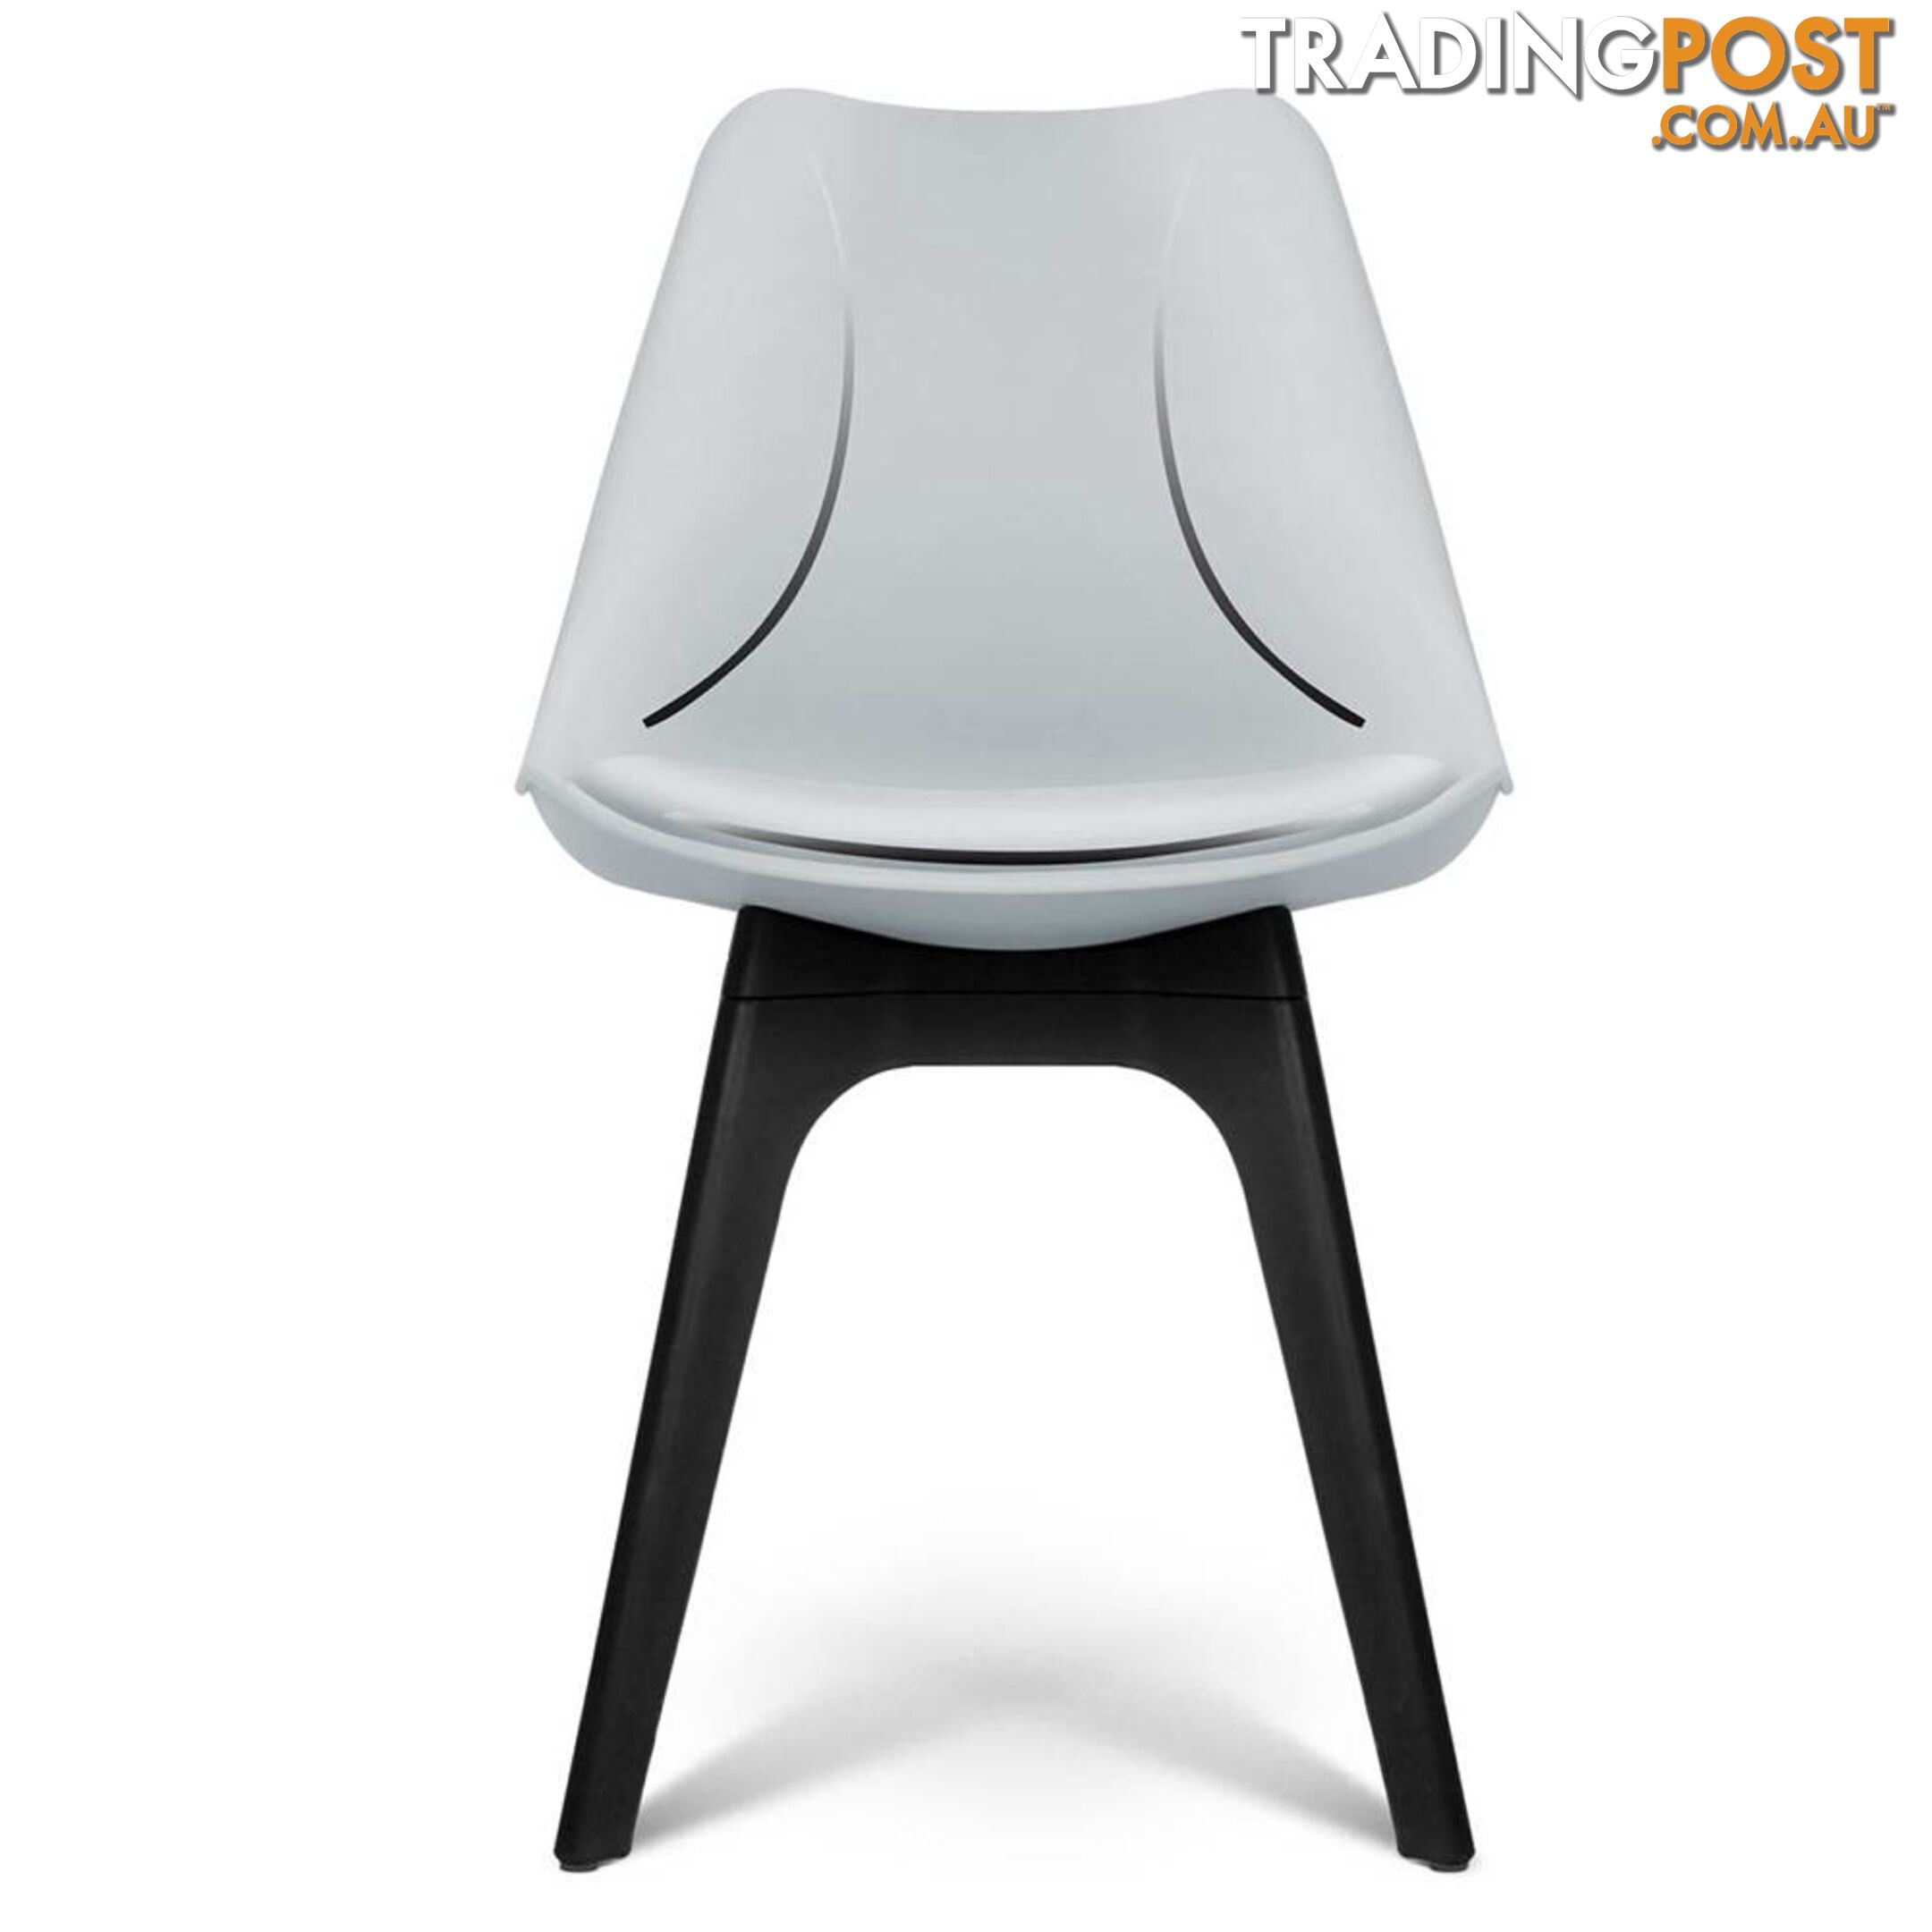 Set of 4 Replica Eames DSW PU Leather Chair Grey